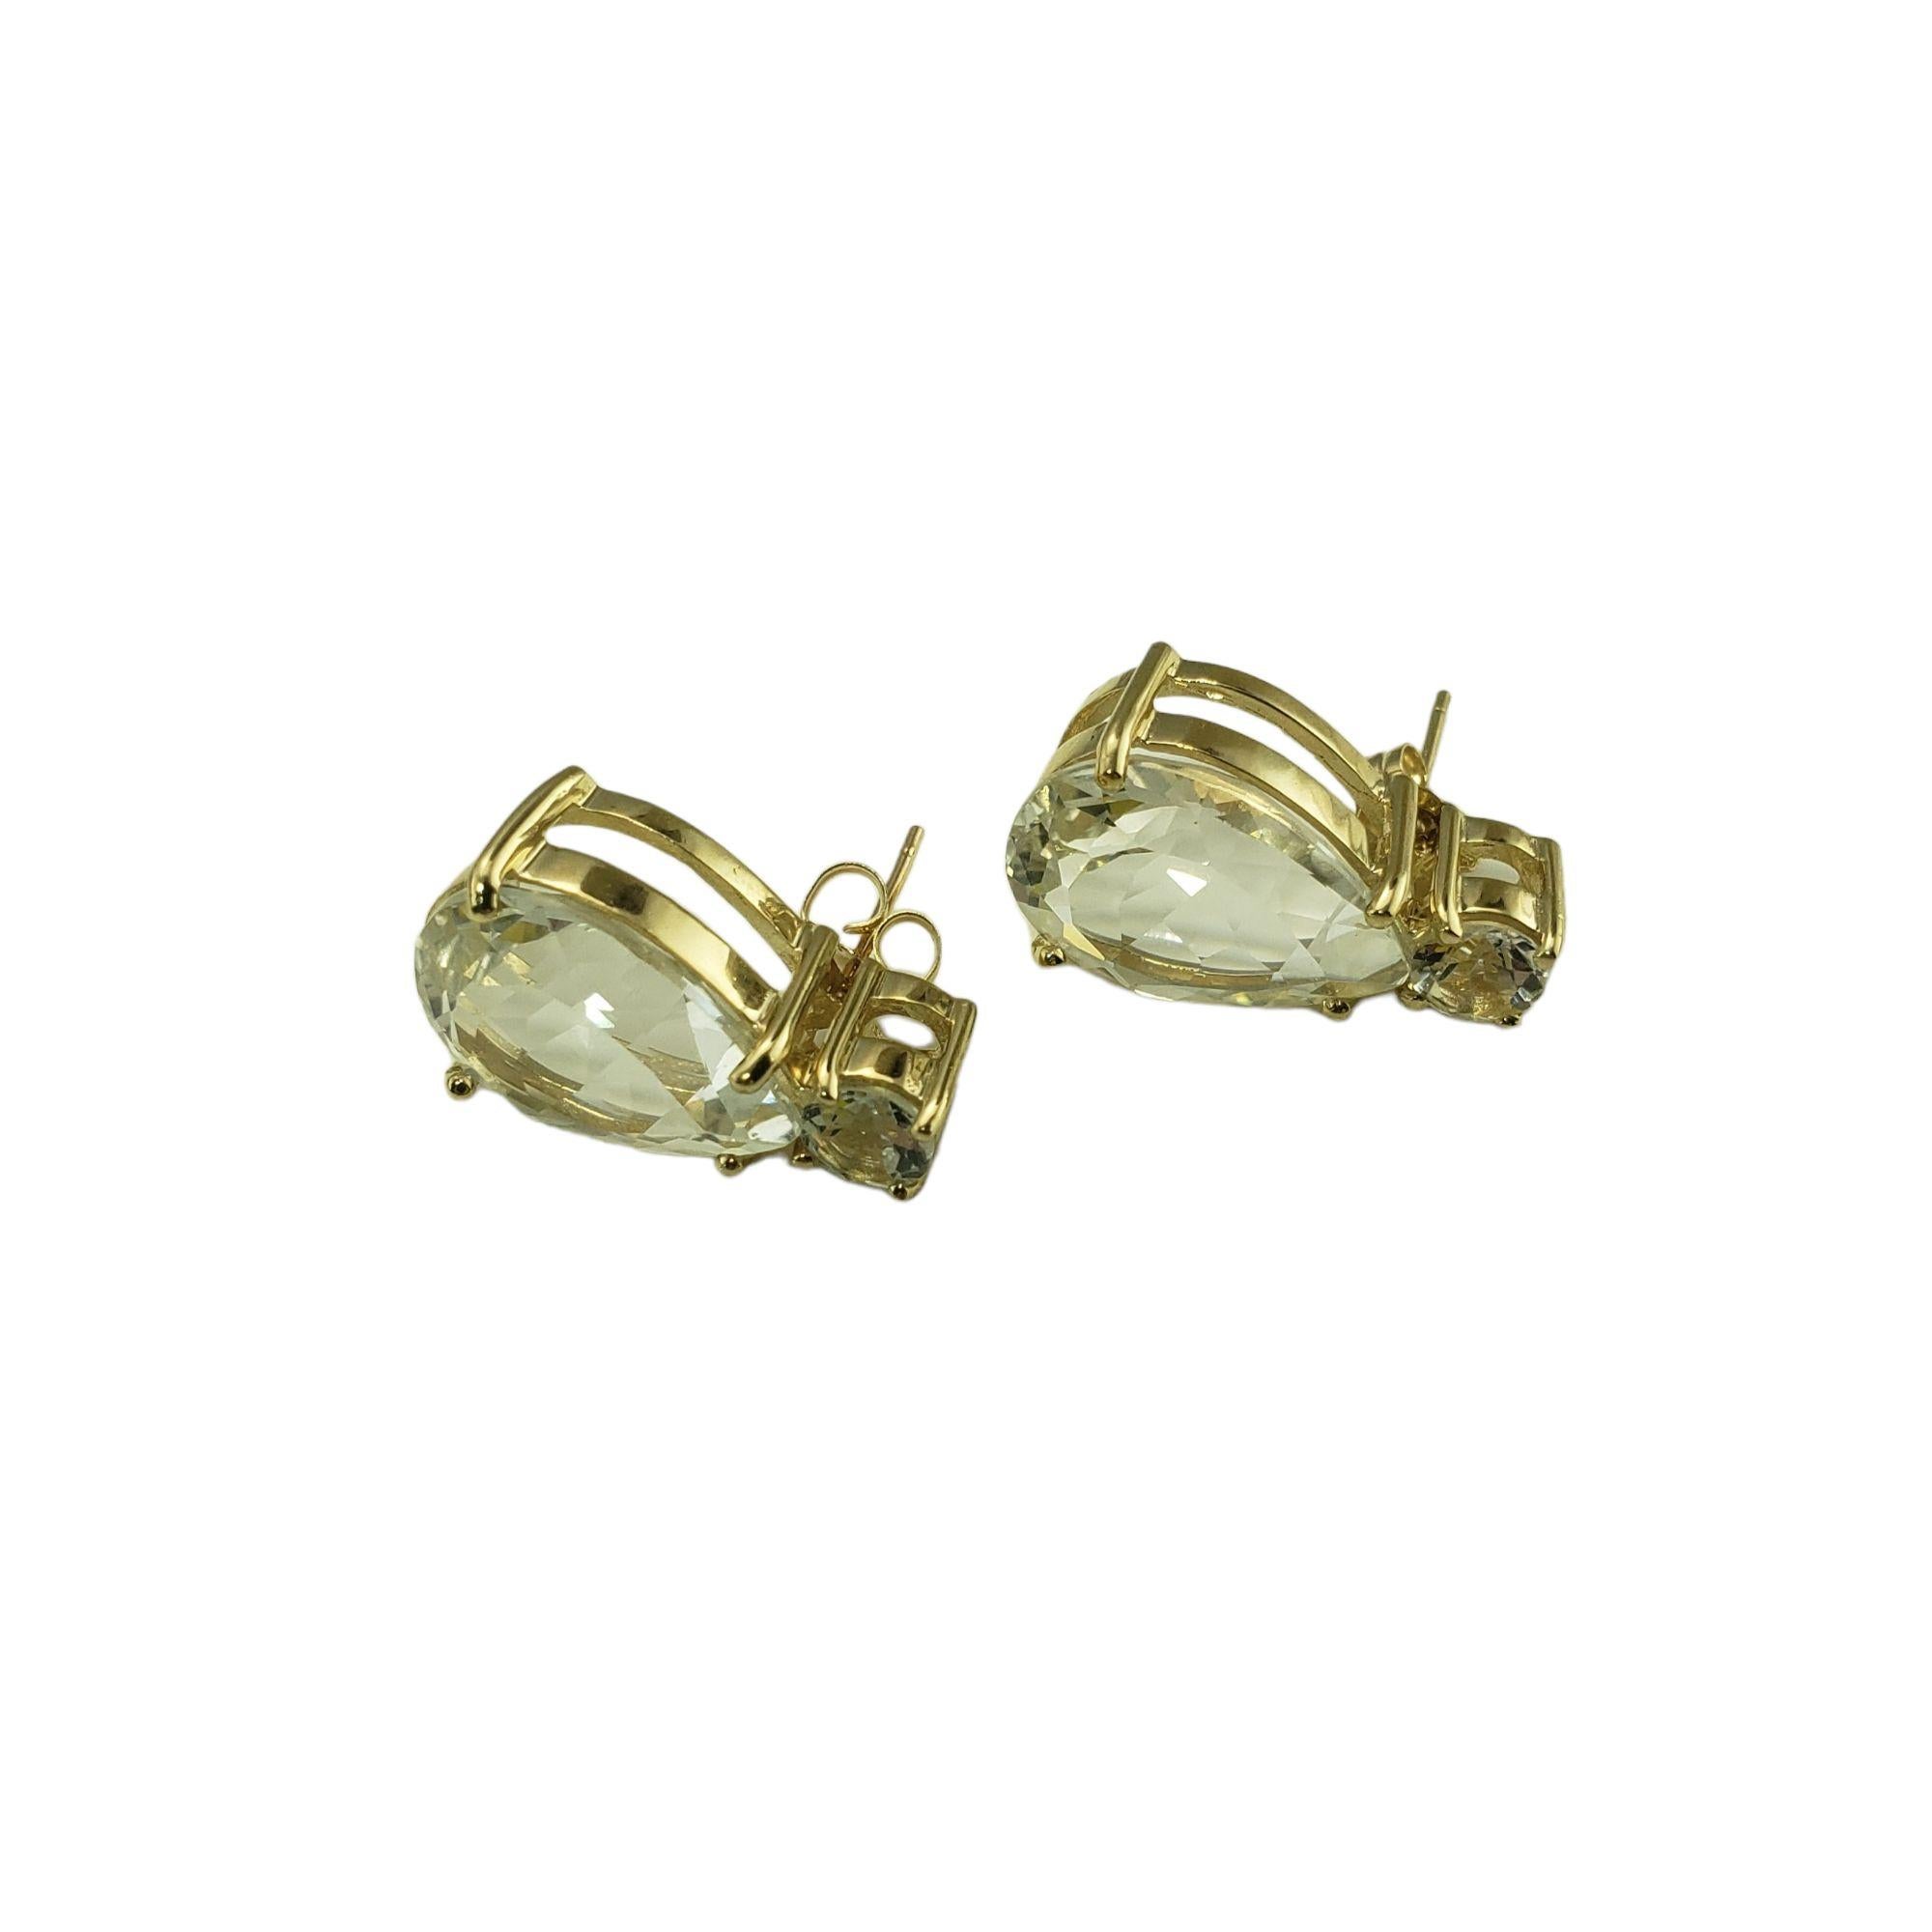 Vintage 10 Karat Yellow Gold White Topaz Earrings JAGi Certified-

These lovely earrings each feature one pear shaped white topaz (16 mm x 12 mm) and one round white topaz (5 mm) set in classic 14K yellow gold. Push back closures.

Total topaz